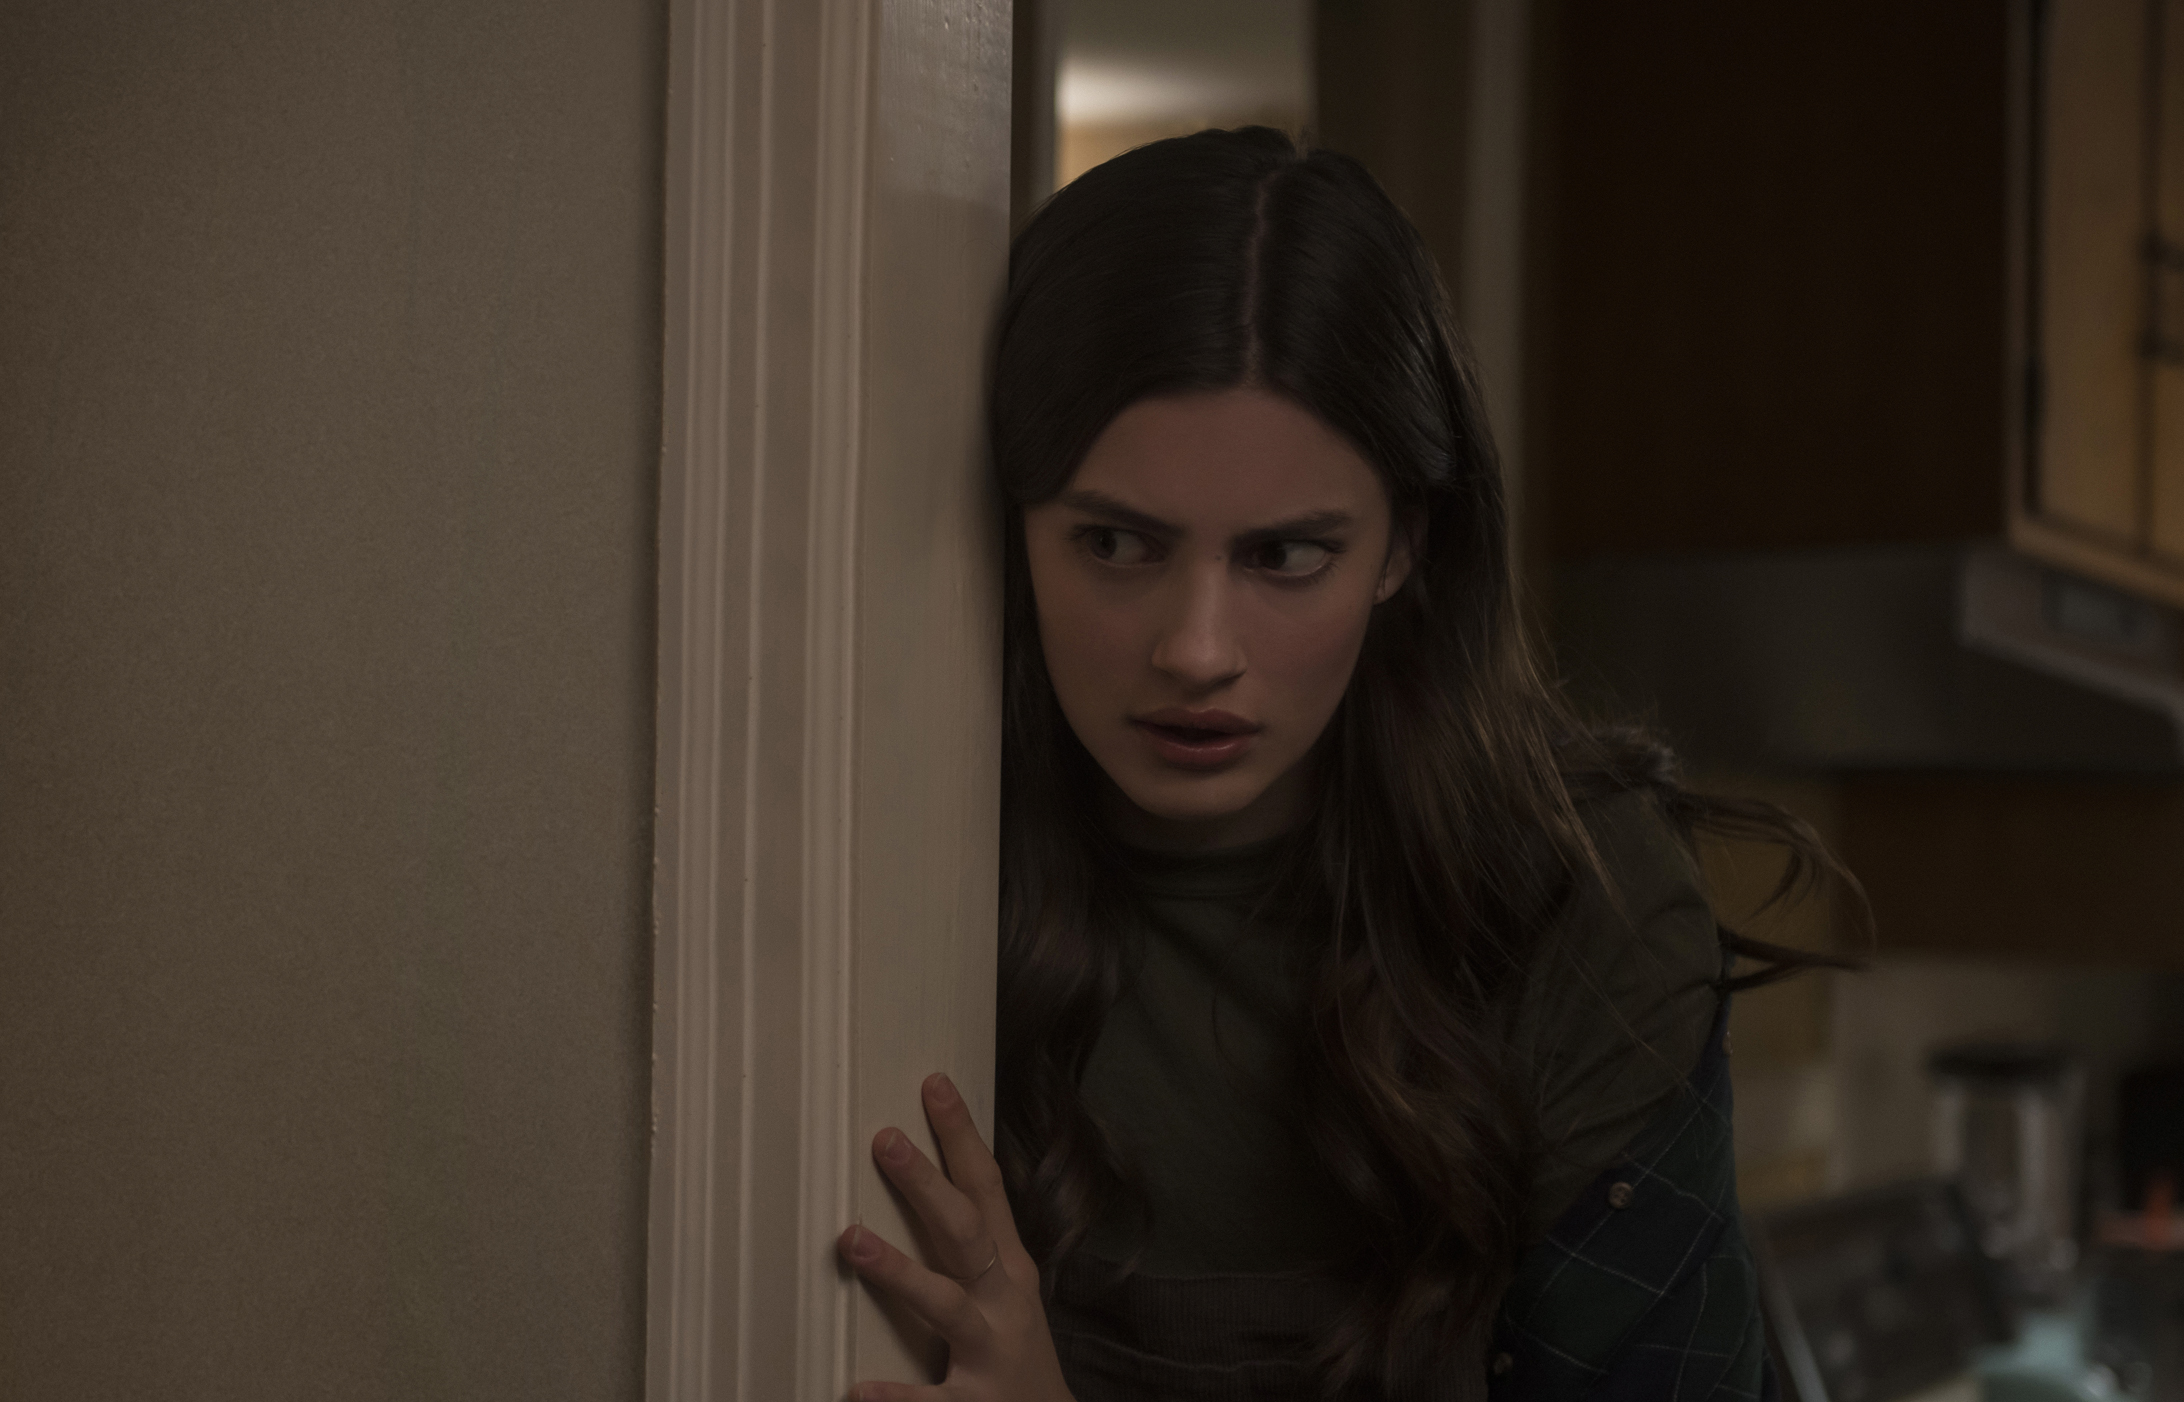 EXCLUSIVE: Diana Silvers on the Cusp of Stardom with Roles in 'Boo...